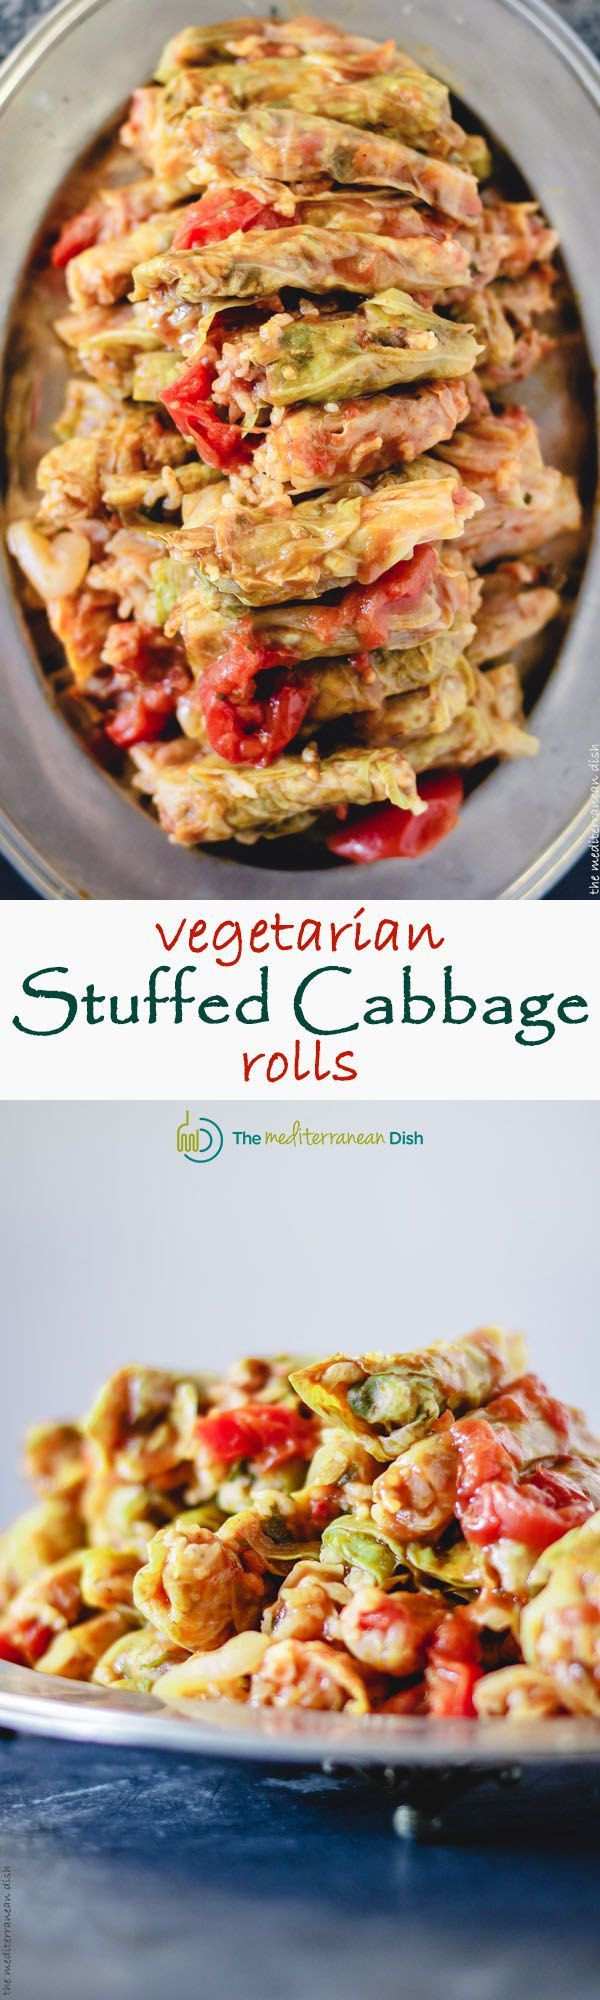 Vegetarian Cabbage Recipes Easy
 Check out Ve arian Stuffed Cabbage Rolls It s so easy